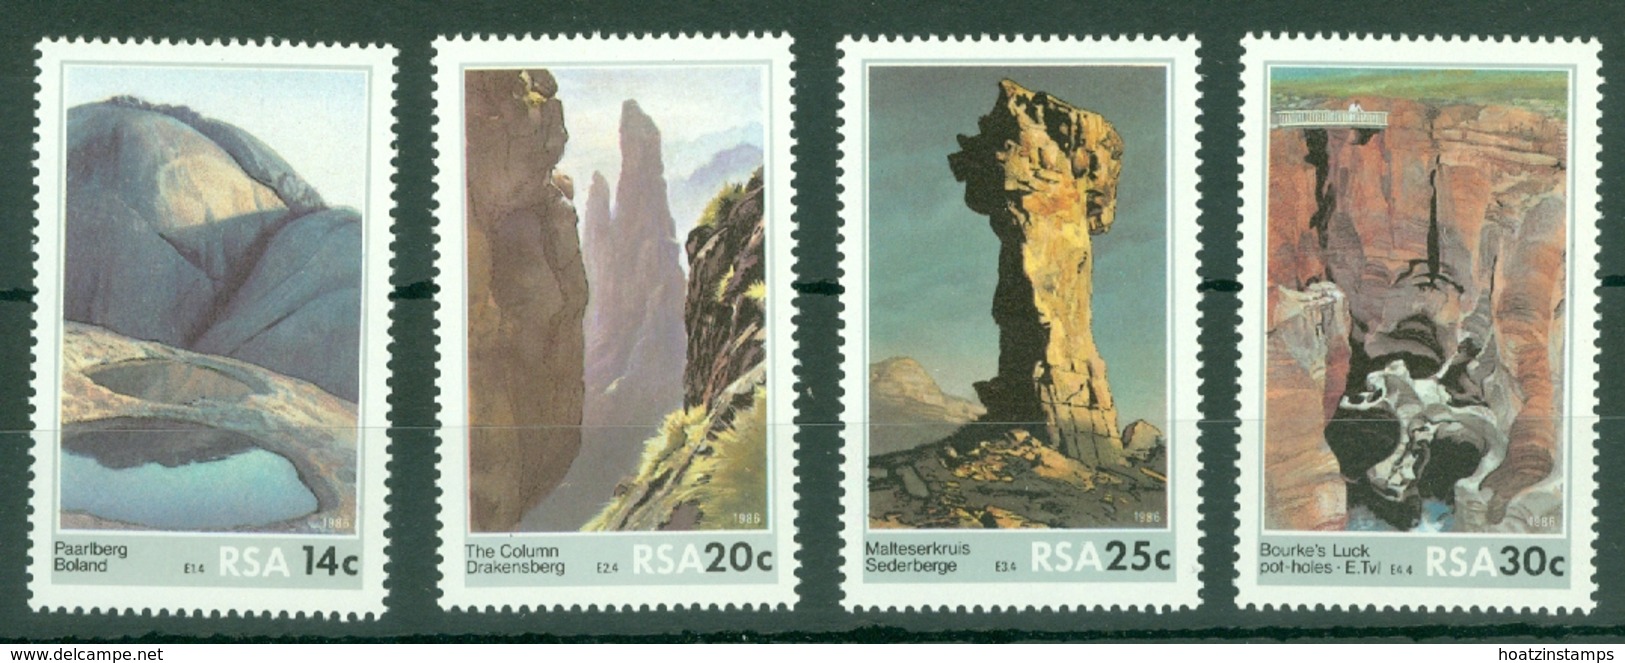 South Africa: 1986   Rock Formations   MNH - Unused Stamps